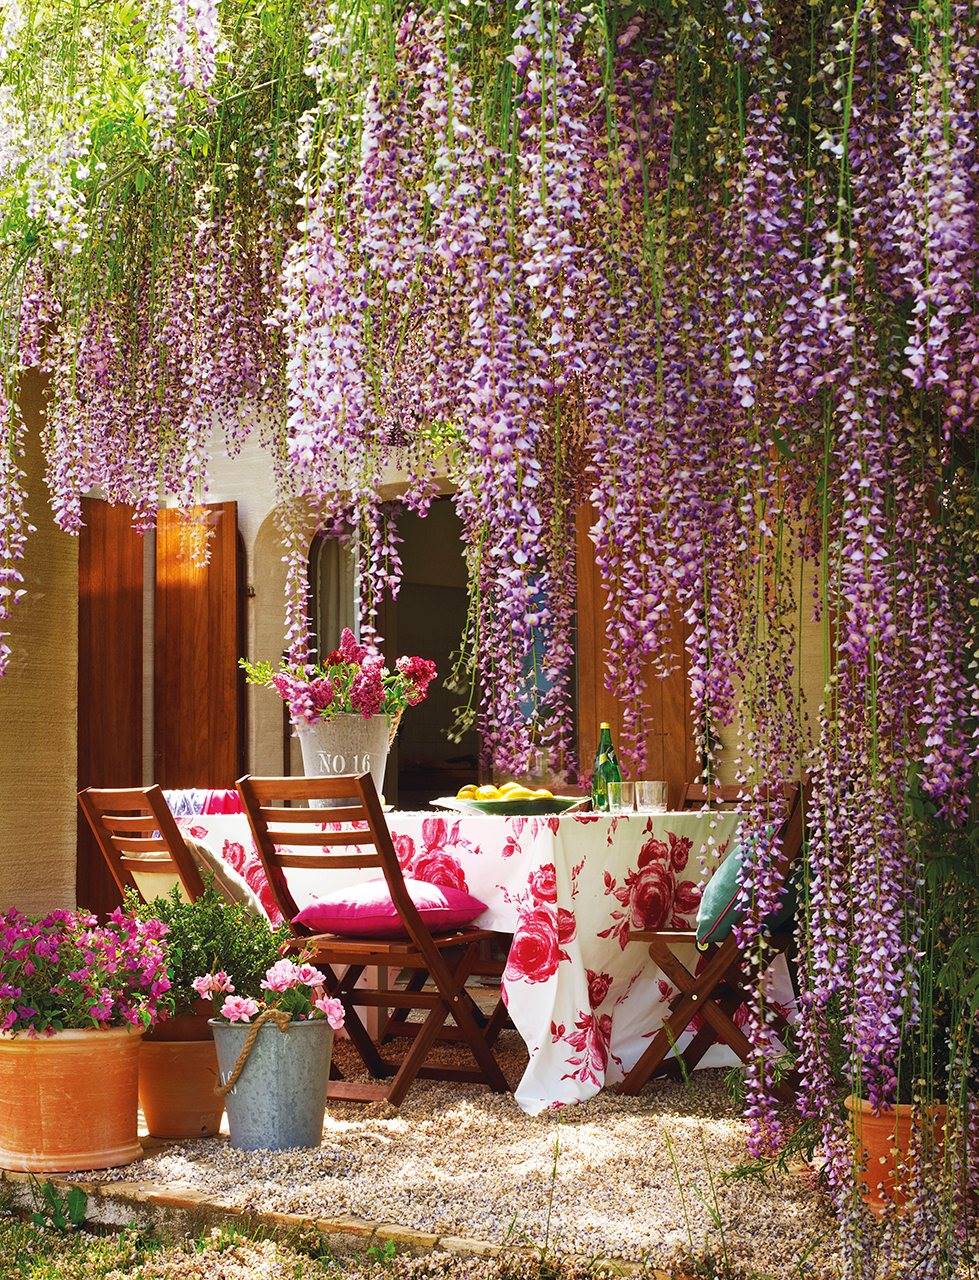 Porch under the wisteria with tables and chairs.